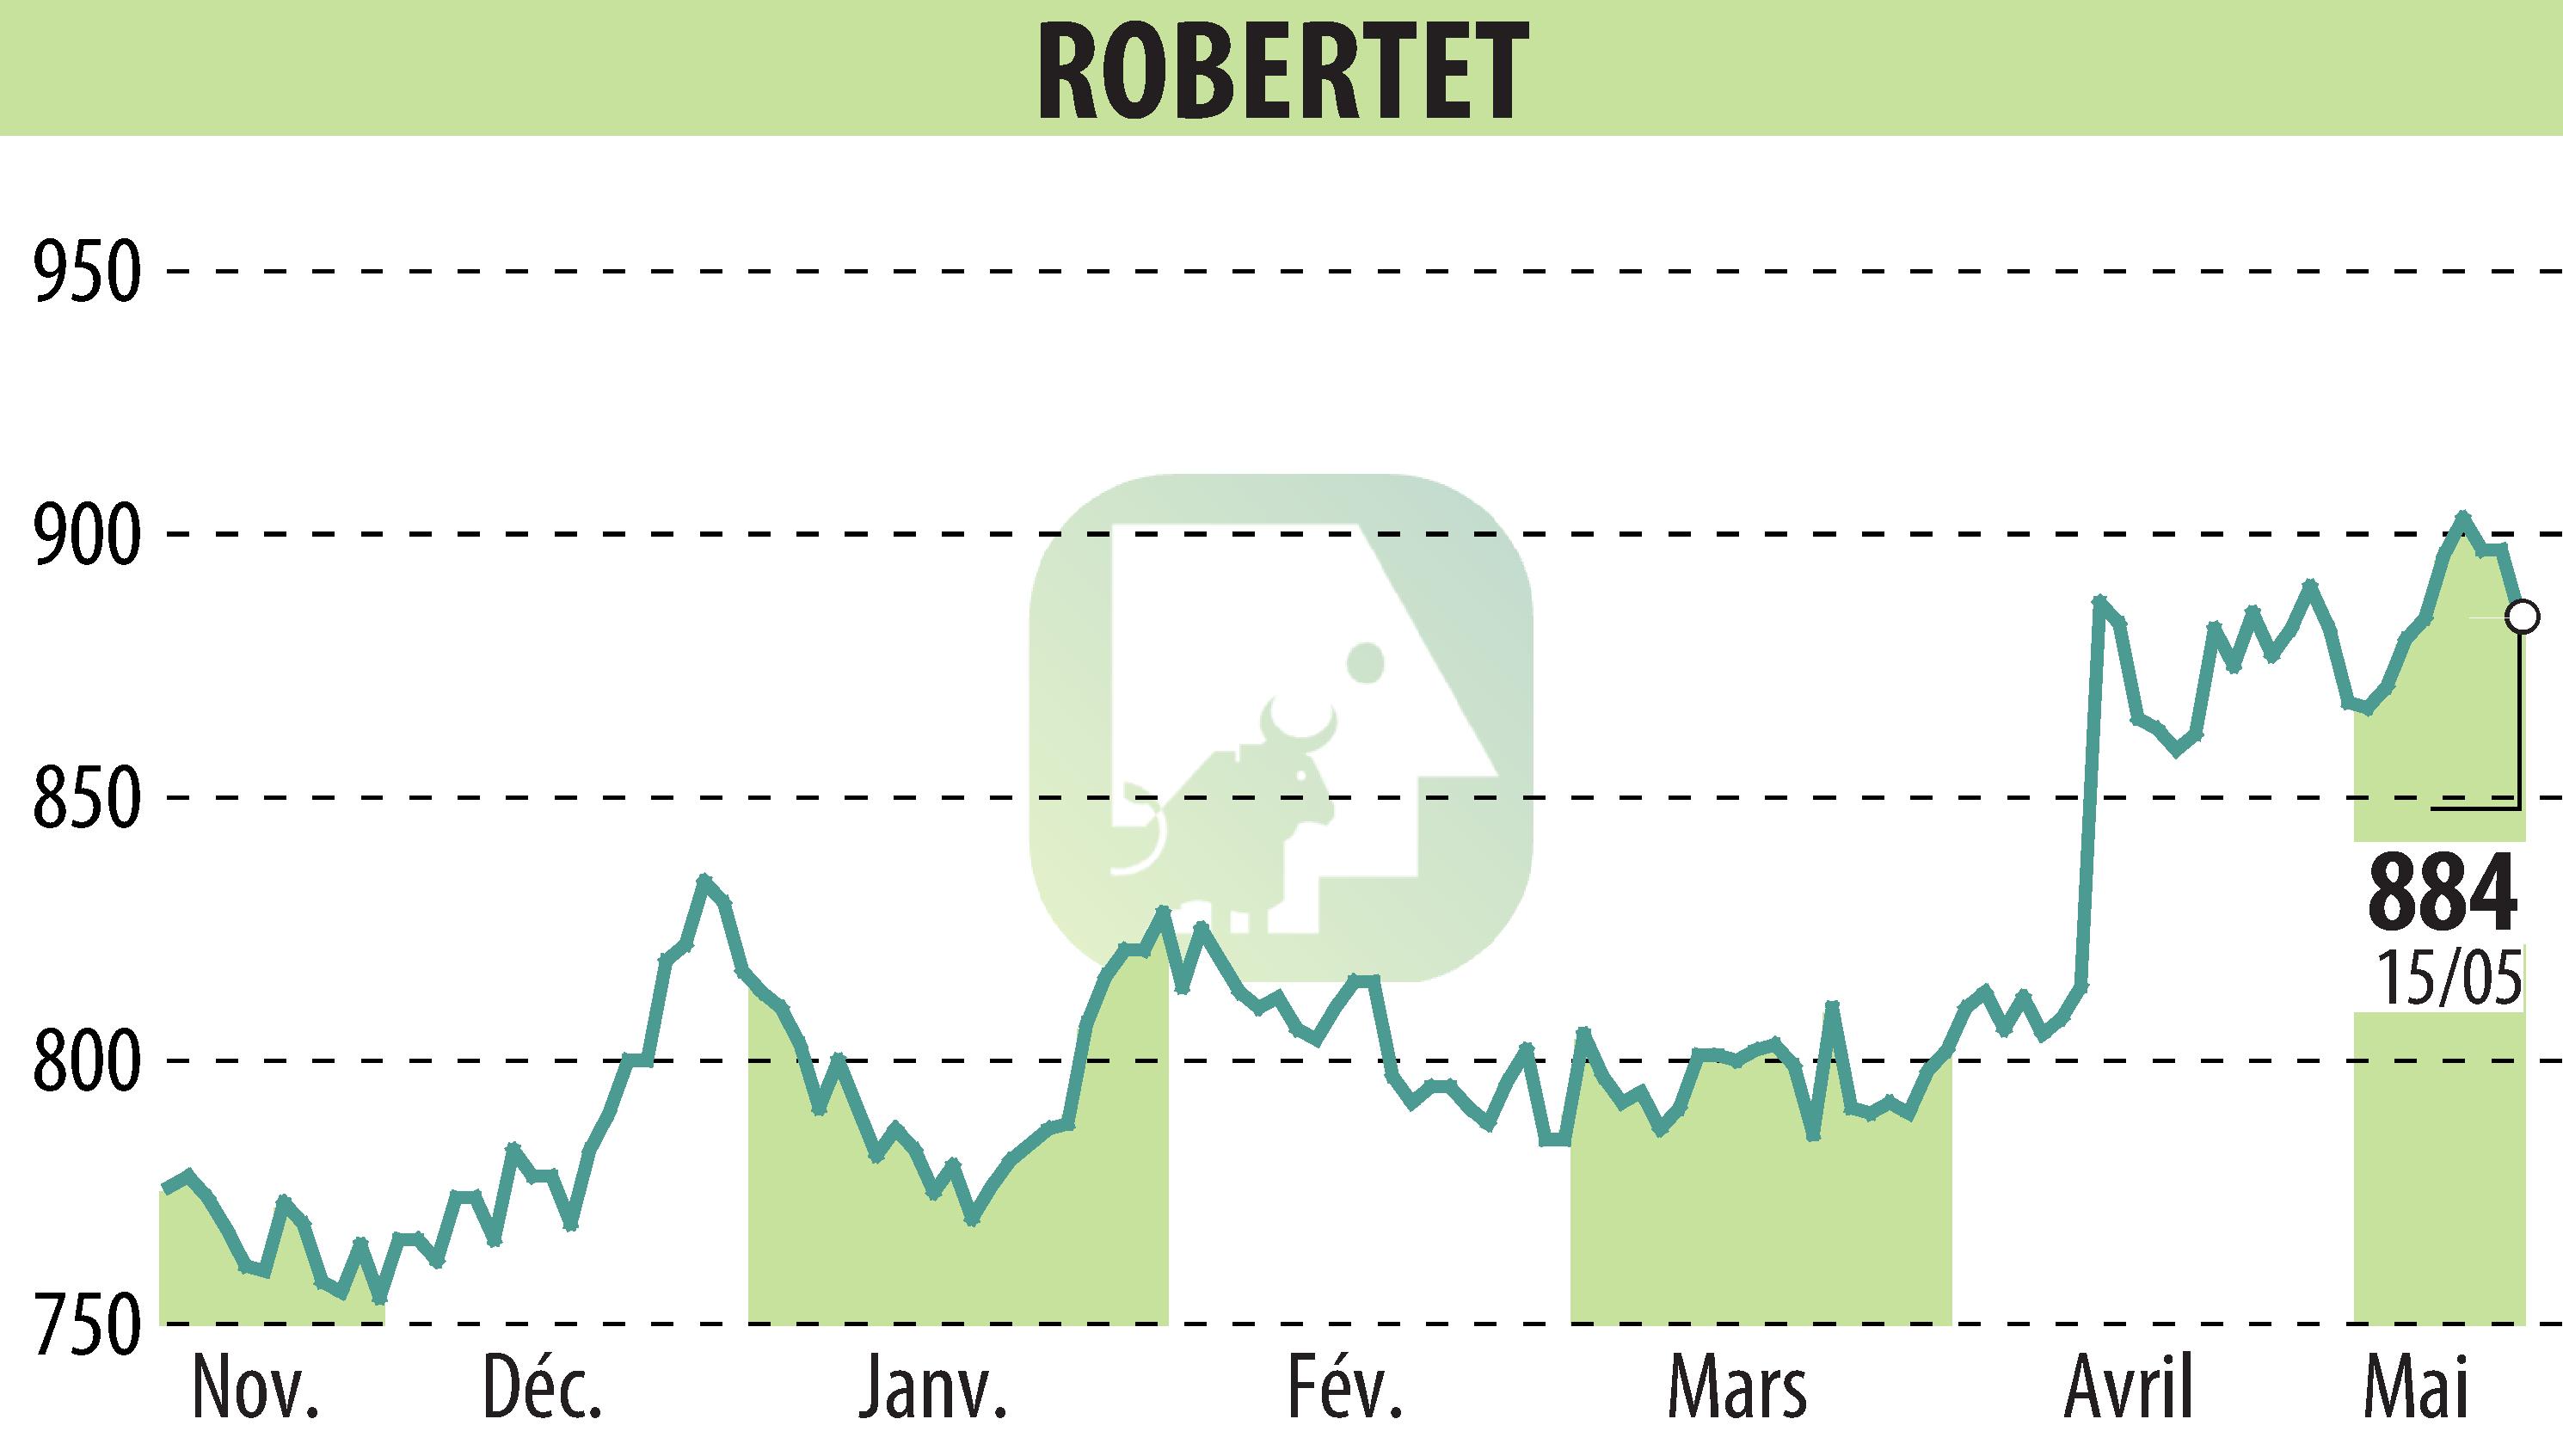 Stock price chart of ROBERTET (EPA:RBT) showing fluctuations.